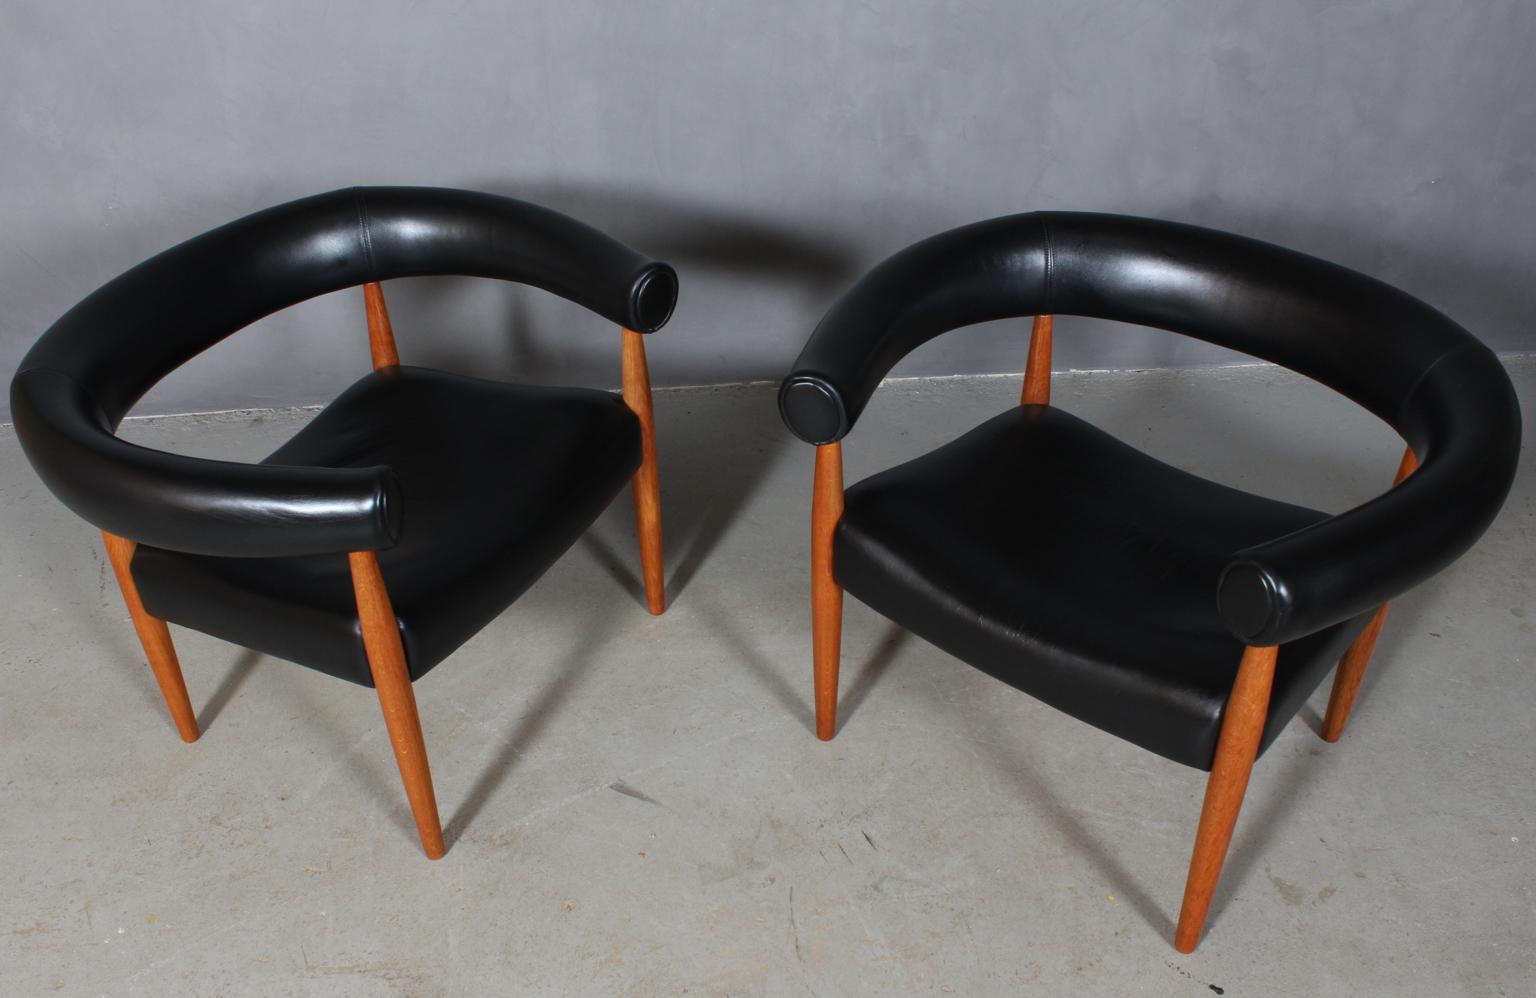 Nanna & Jørgen Ditzel. Two ring armchairs in oiled oak.

Upholstered with black patinated leather.

Made by Kolds Savværk.